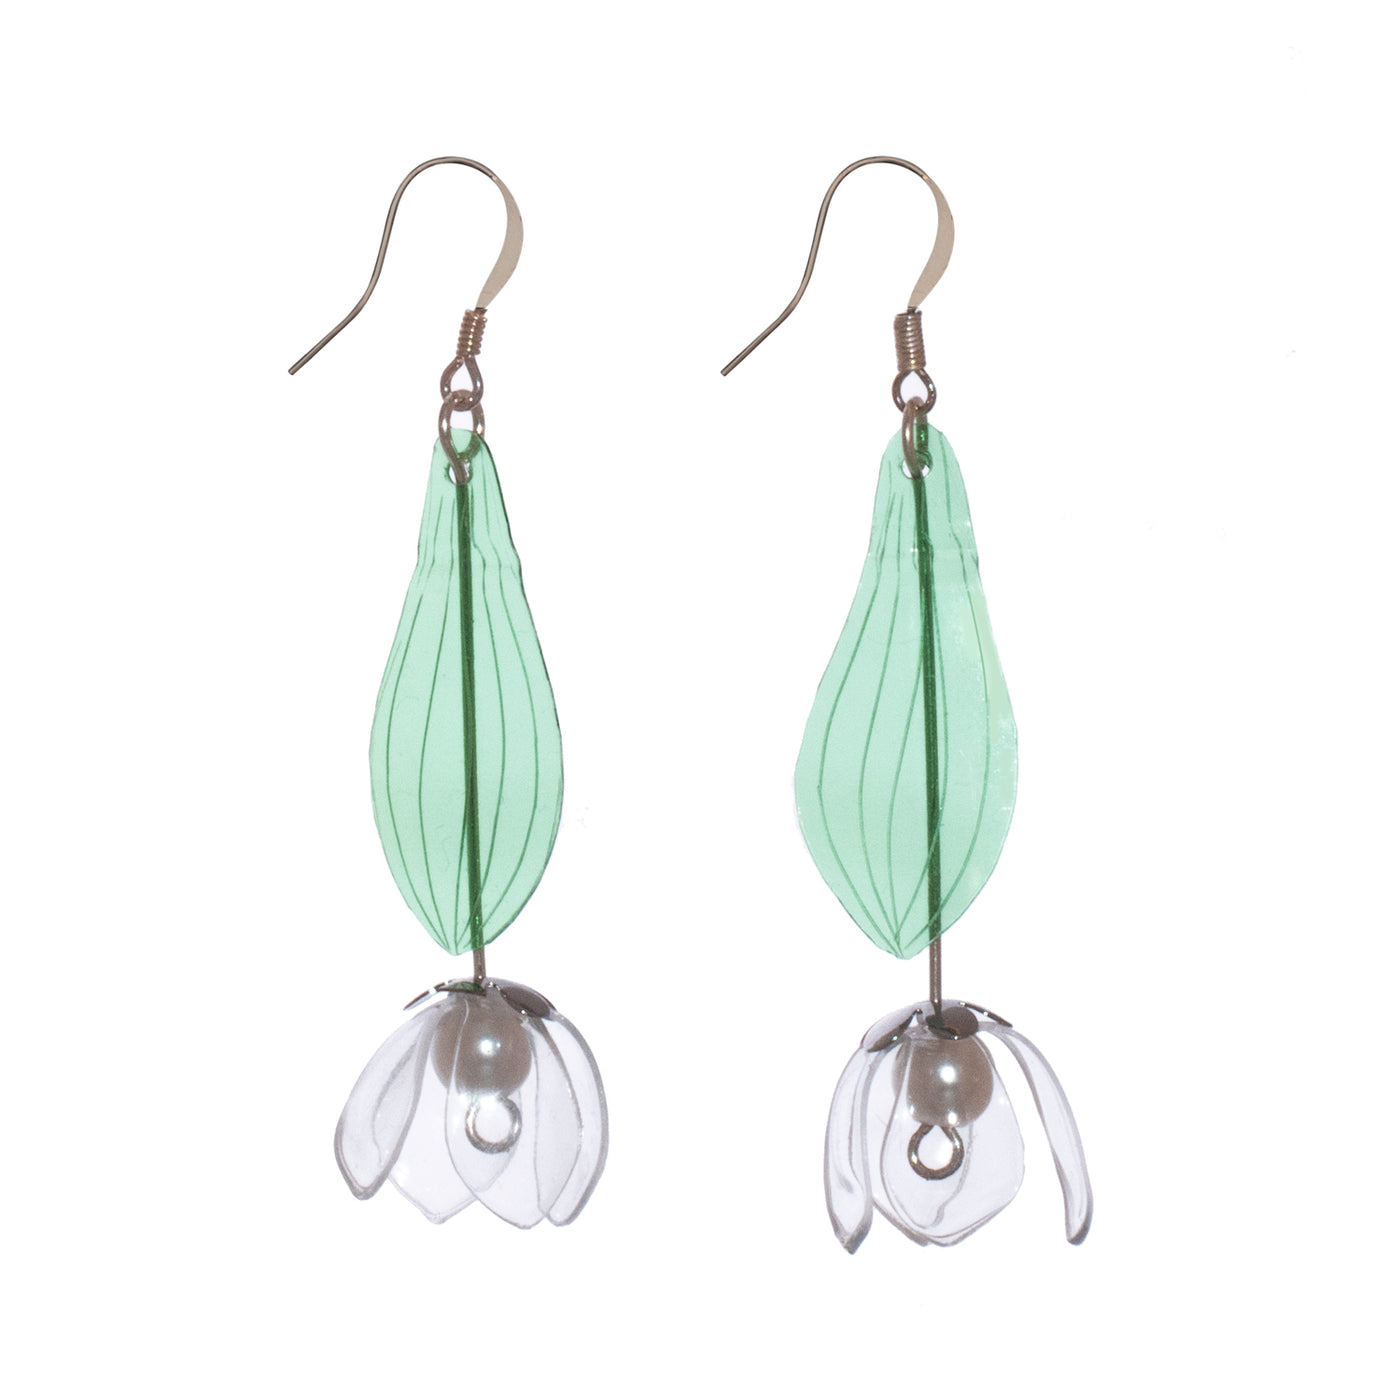 Just a Flower Earrings - Lily of the Valley